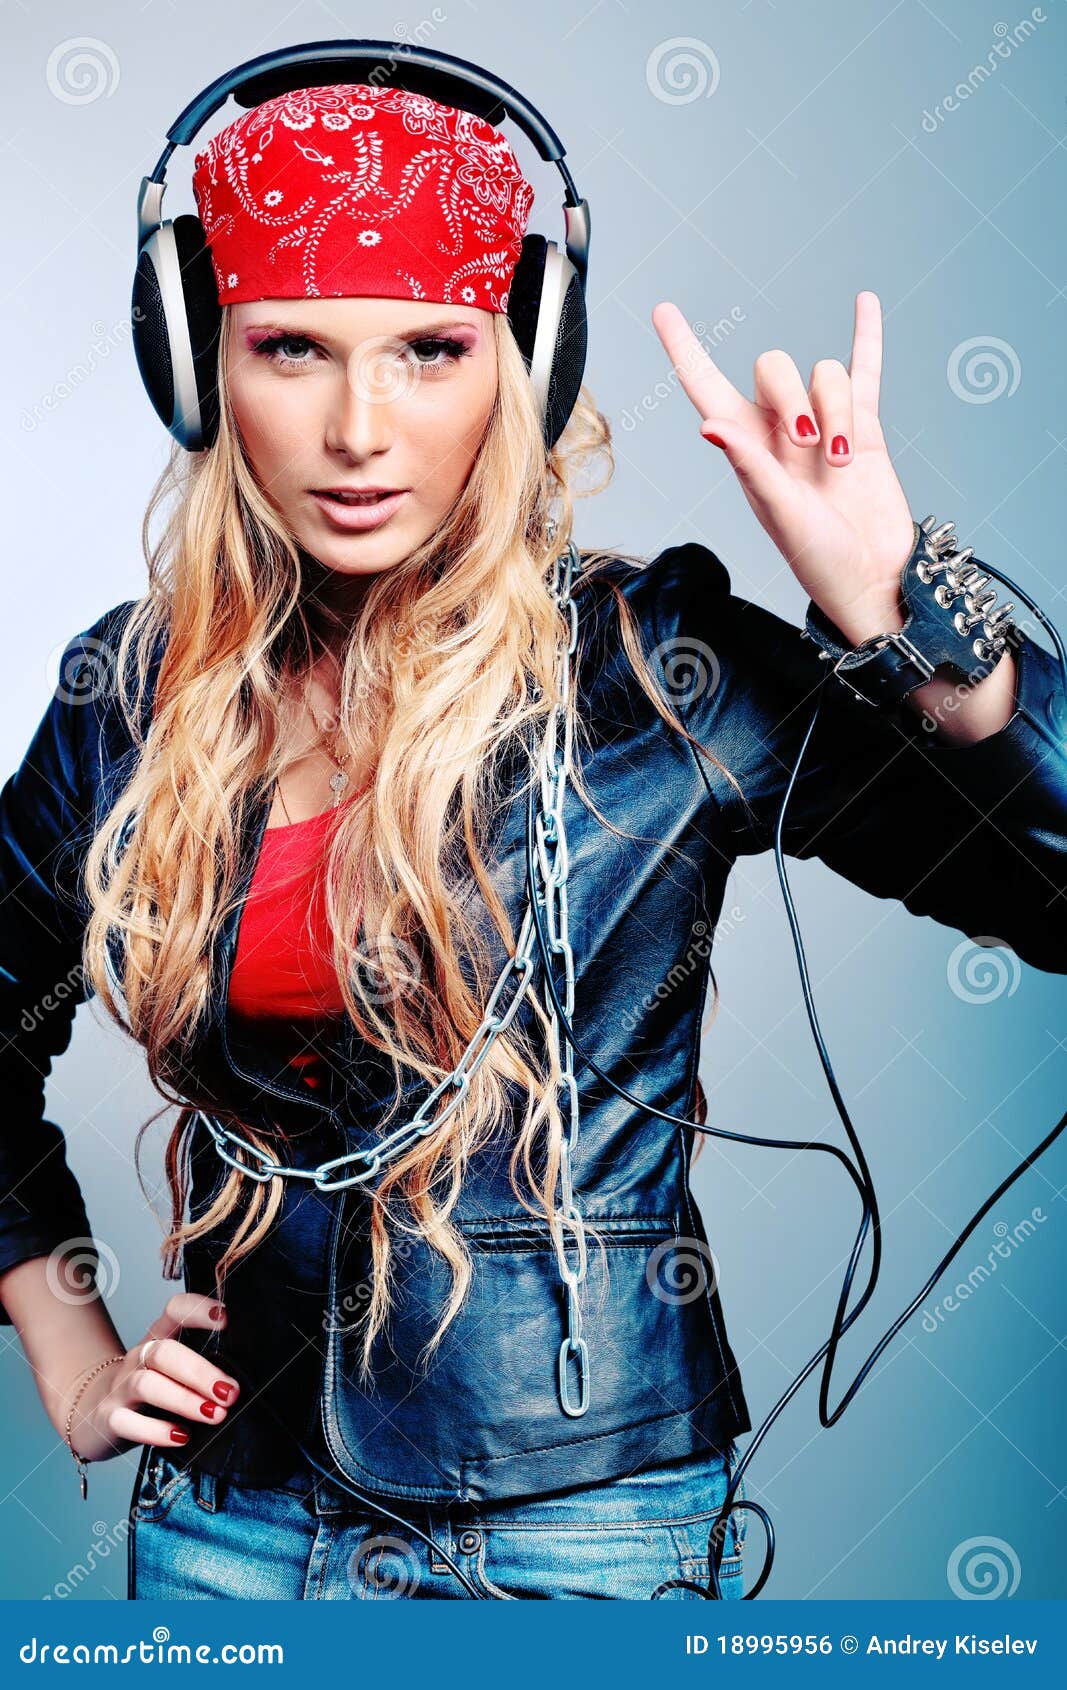 Cool girl stock photo. Image of lady, grey, music, people - 18995956